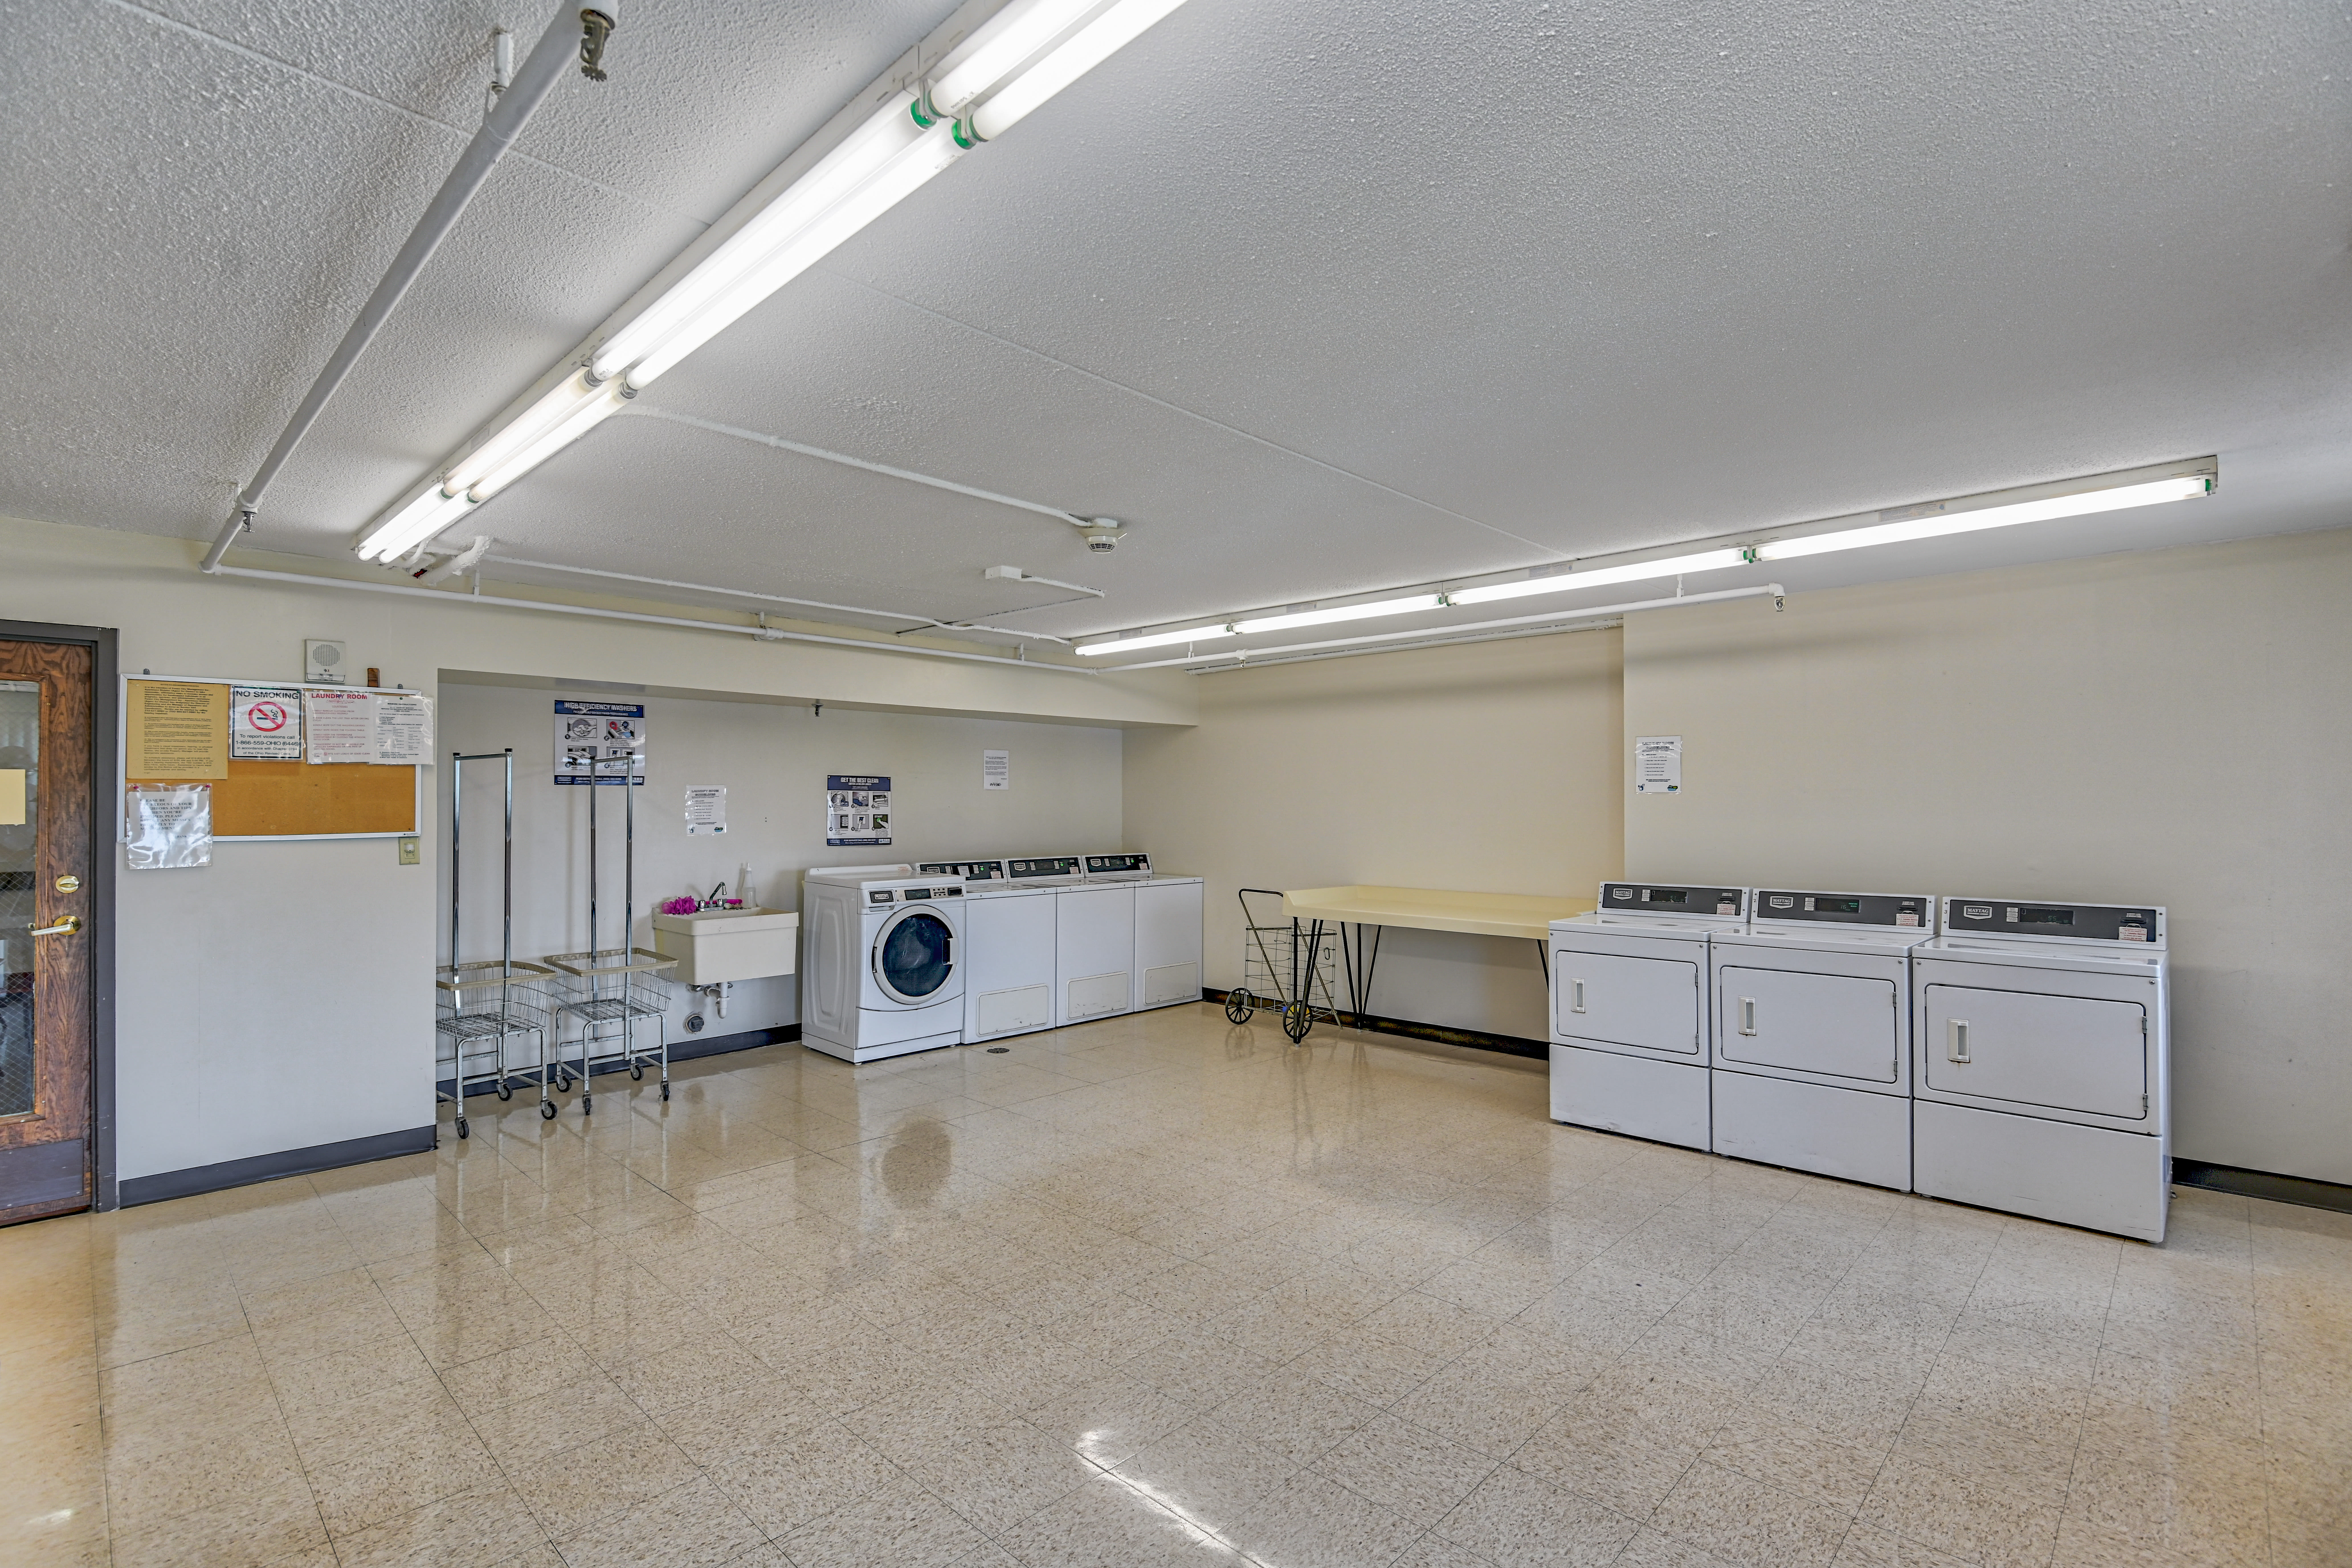 Laundry room at Riverside Towers in Coshocton, Ohio